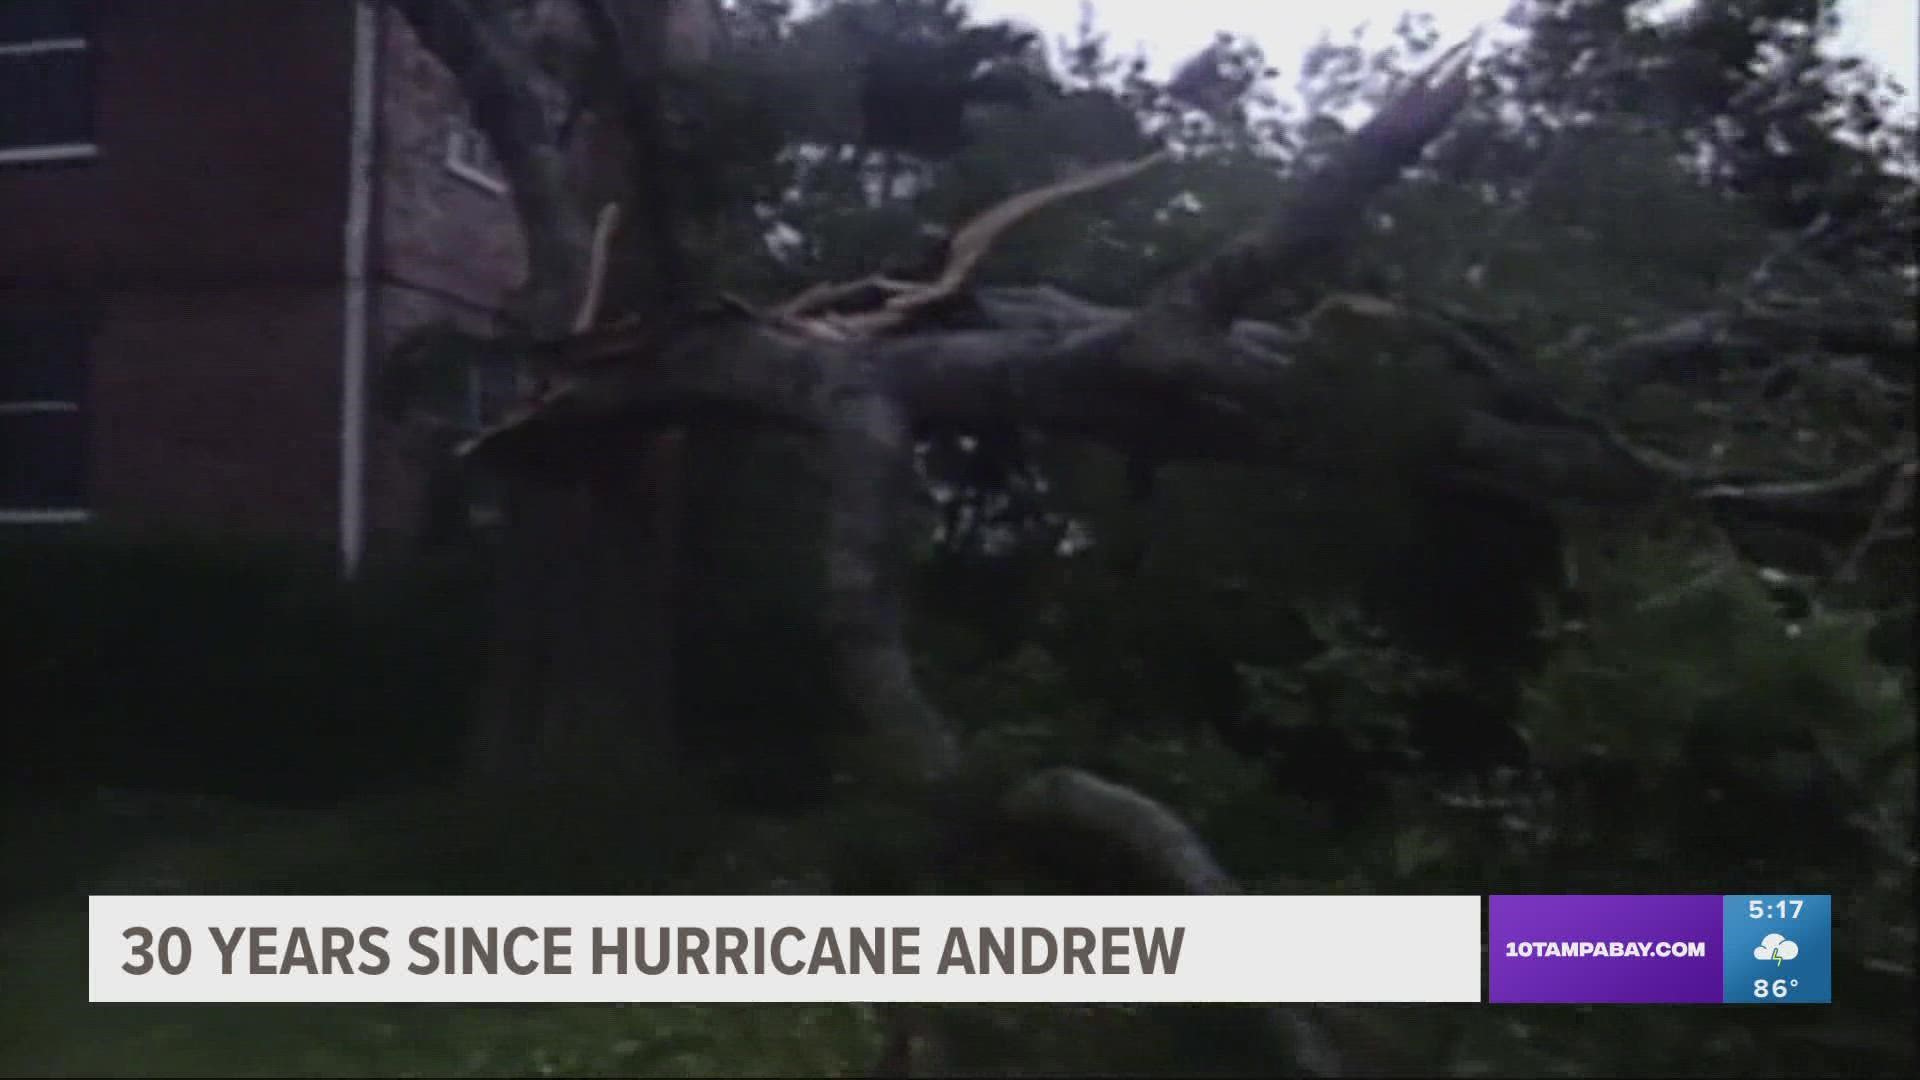 Hurricane Andrew was the strongest and most devastating hurricane on record to hit South Florida, according to The Weather Channel.